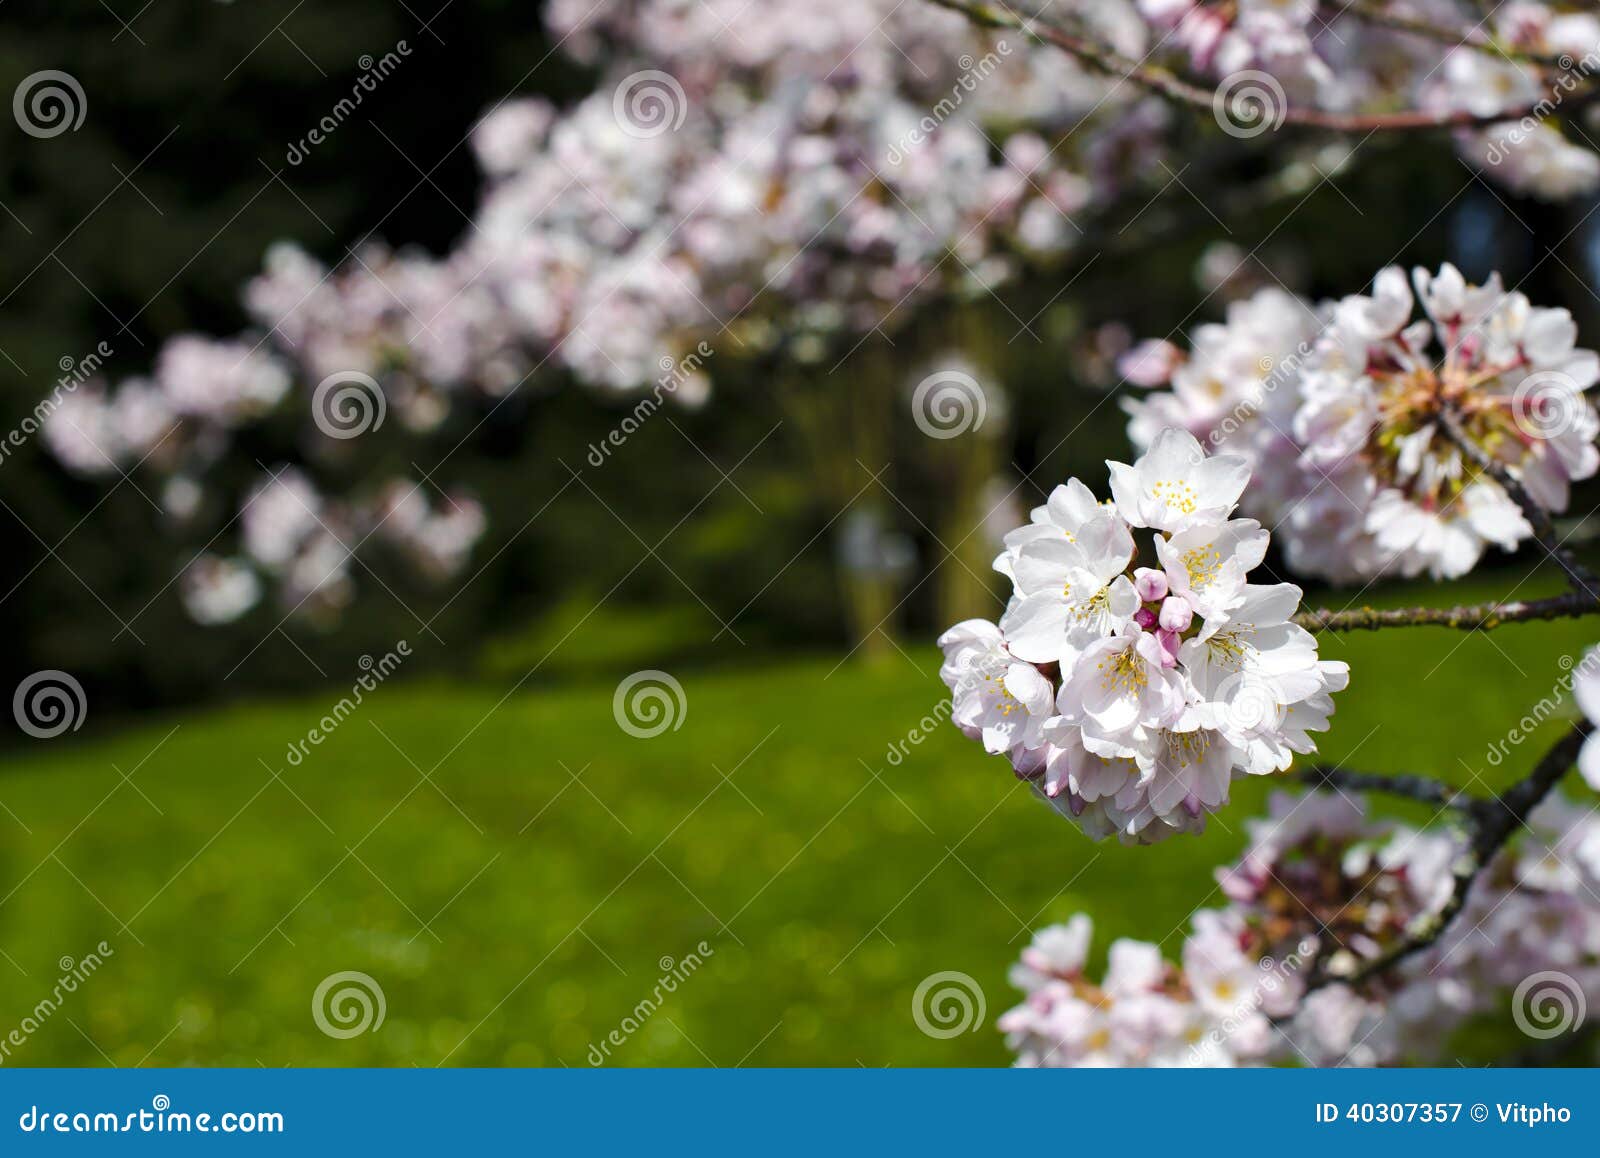 Spring mood revival stock image. Image of light, life - 40307357